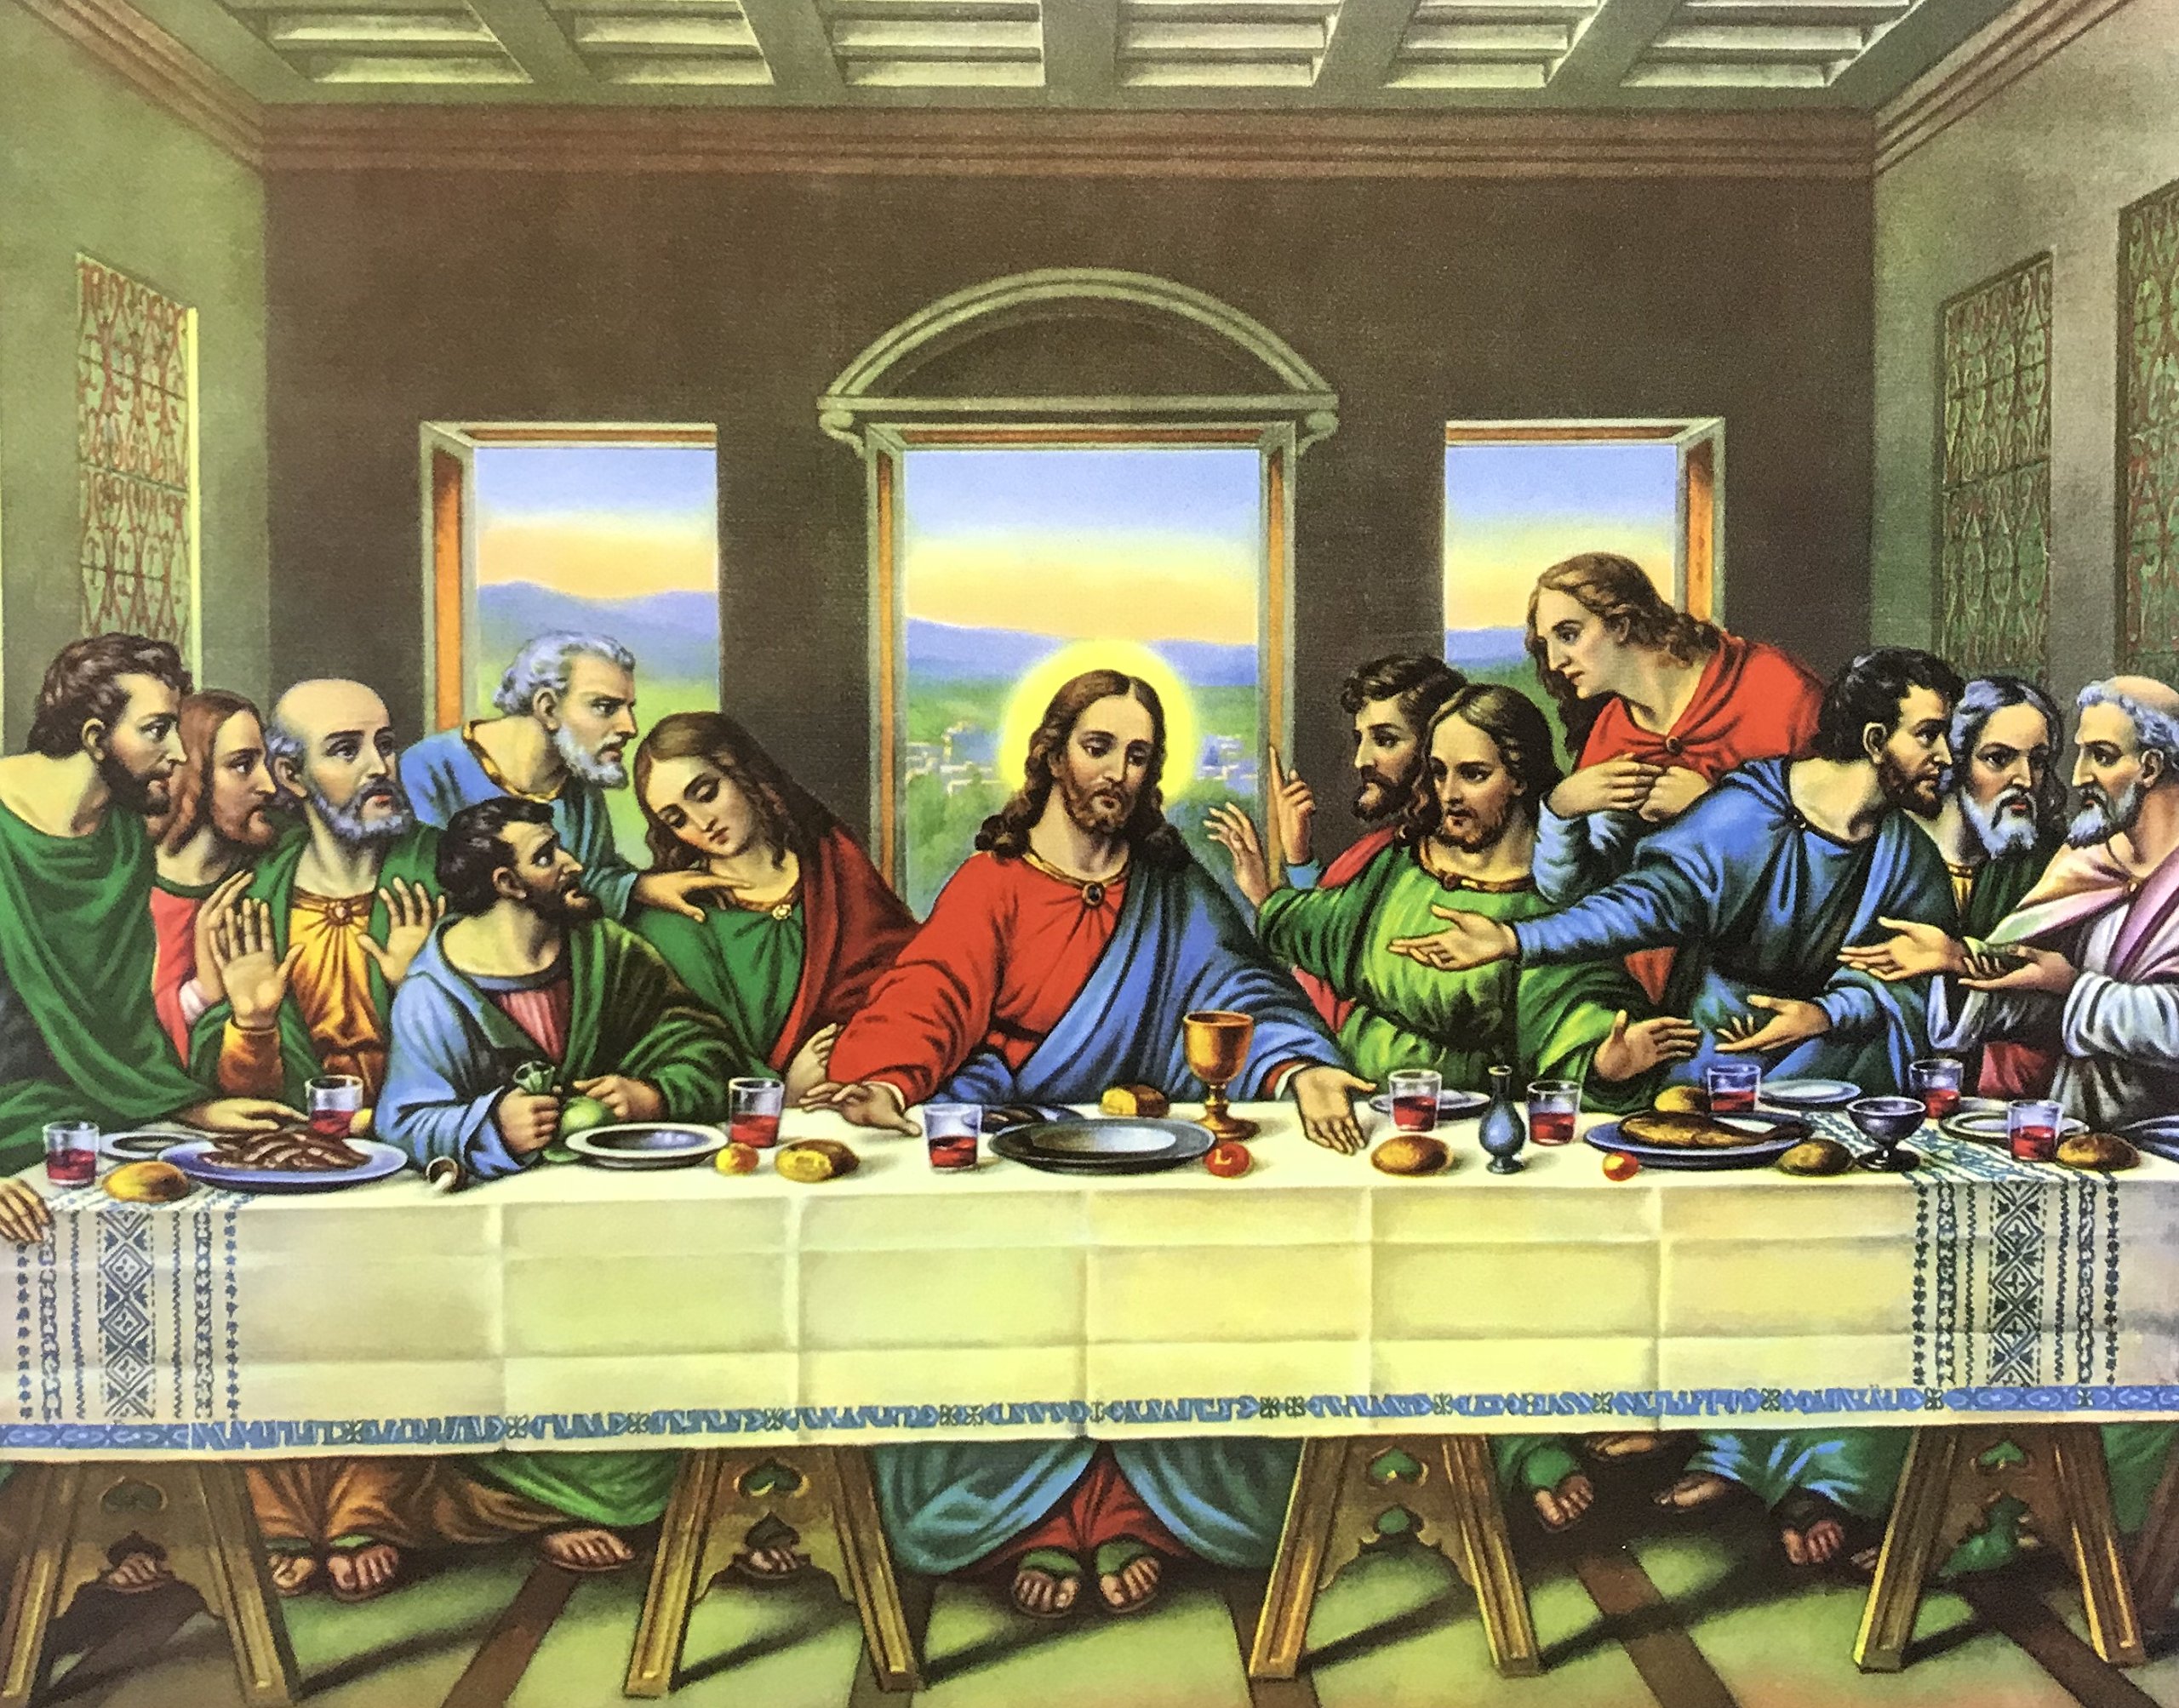 Unframed Print The Last Supper V, (White Religious 6 810 R) 8x10 Inch Unknown, Art Print & Poster